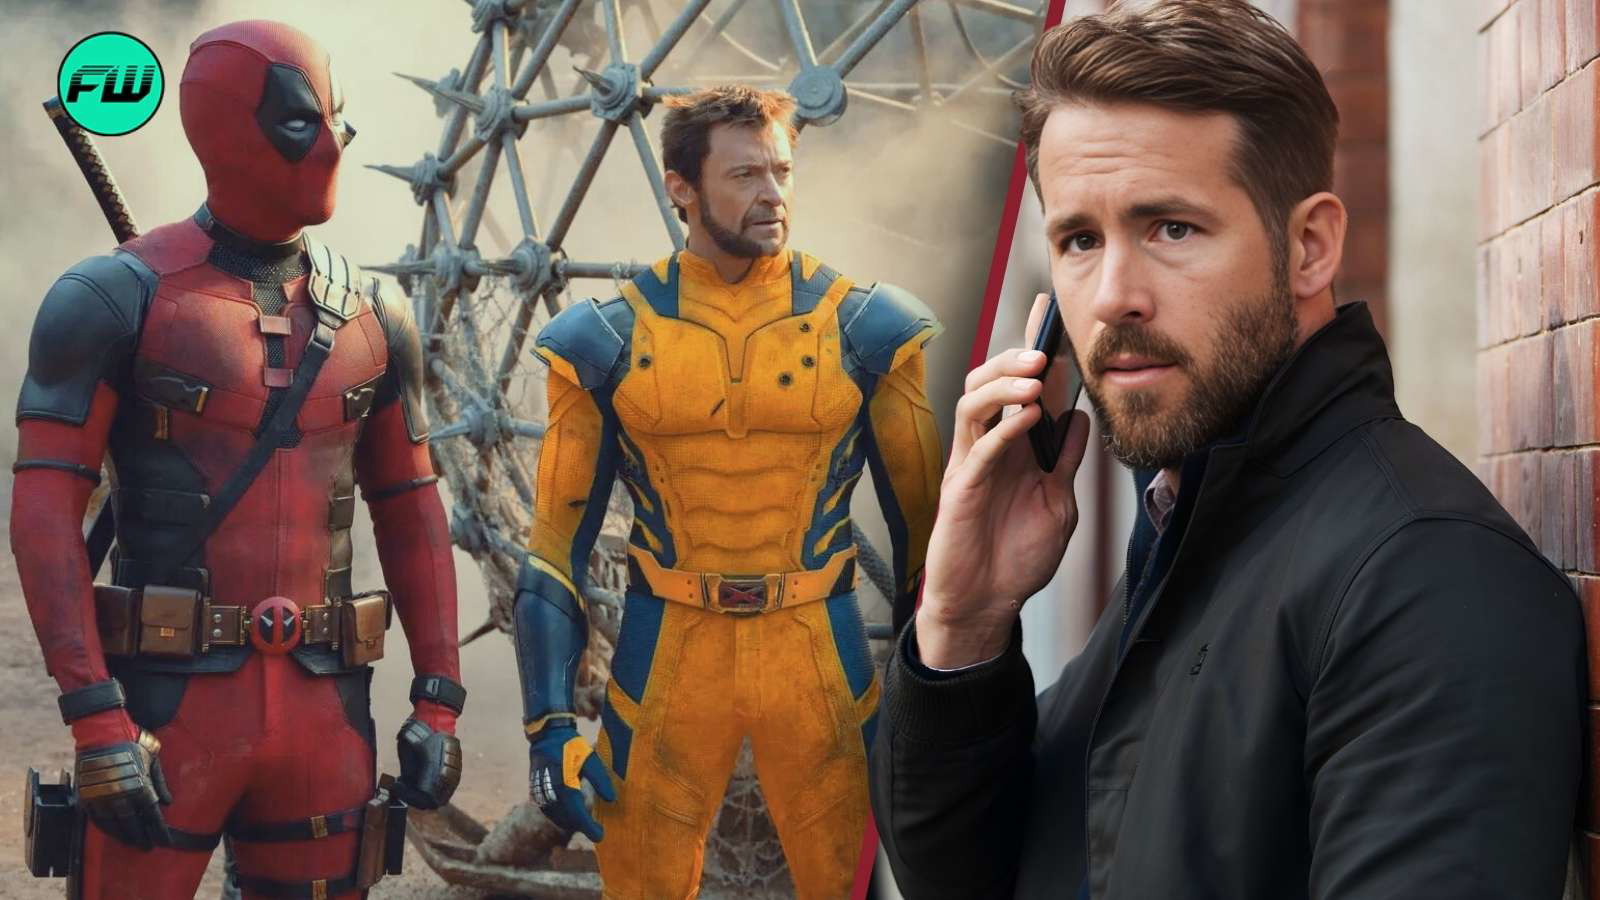 “Ryan Reynolds is now a billionaire”- Ryan Reynolds’ Net Worth Did Not Grow Astronomically Because of the Money He Made From Deadpool